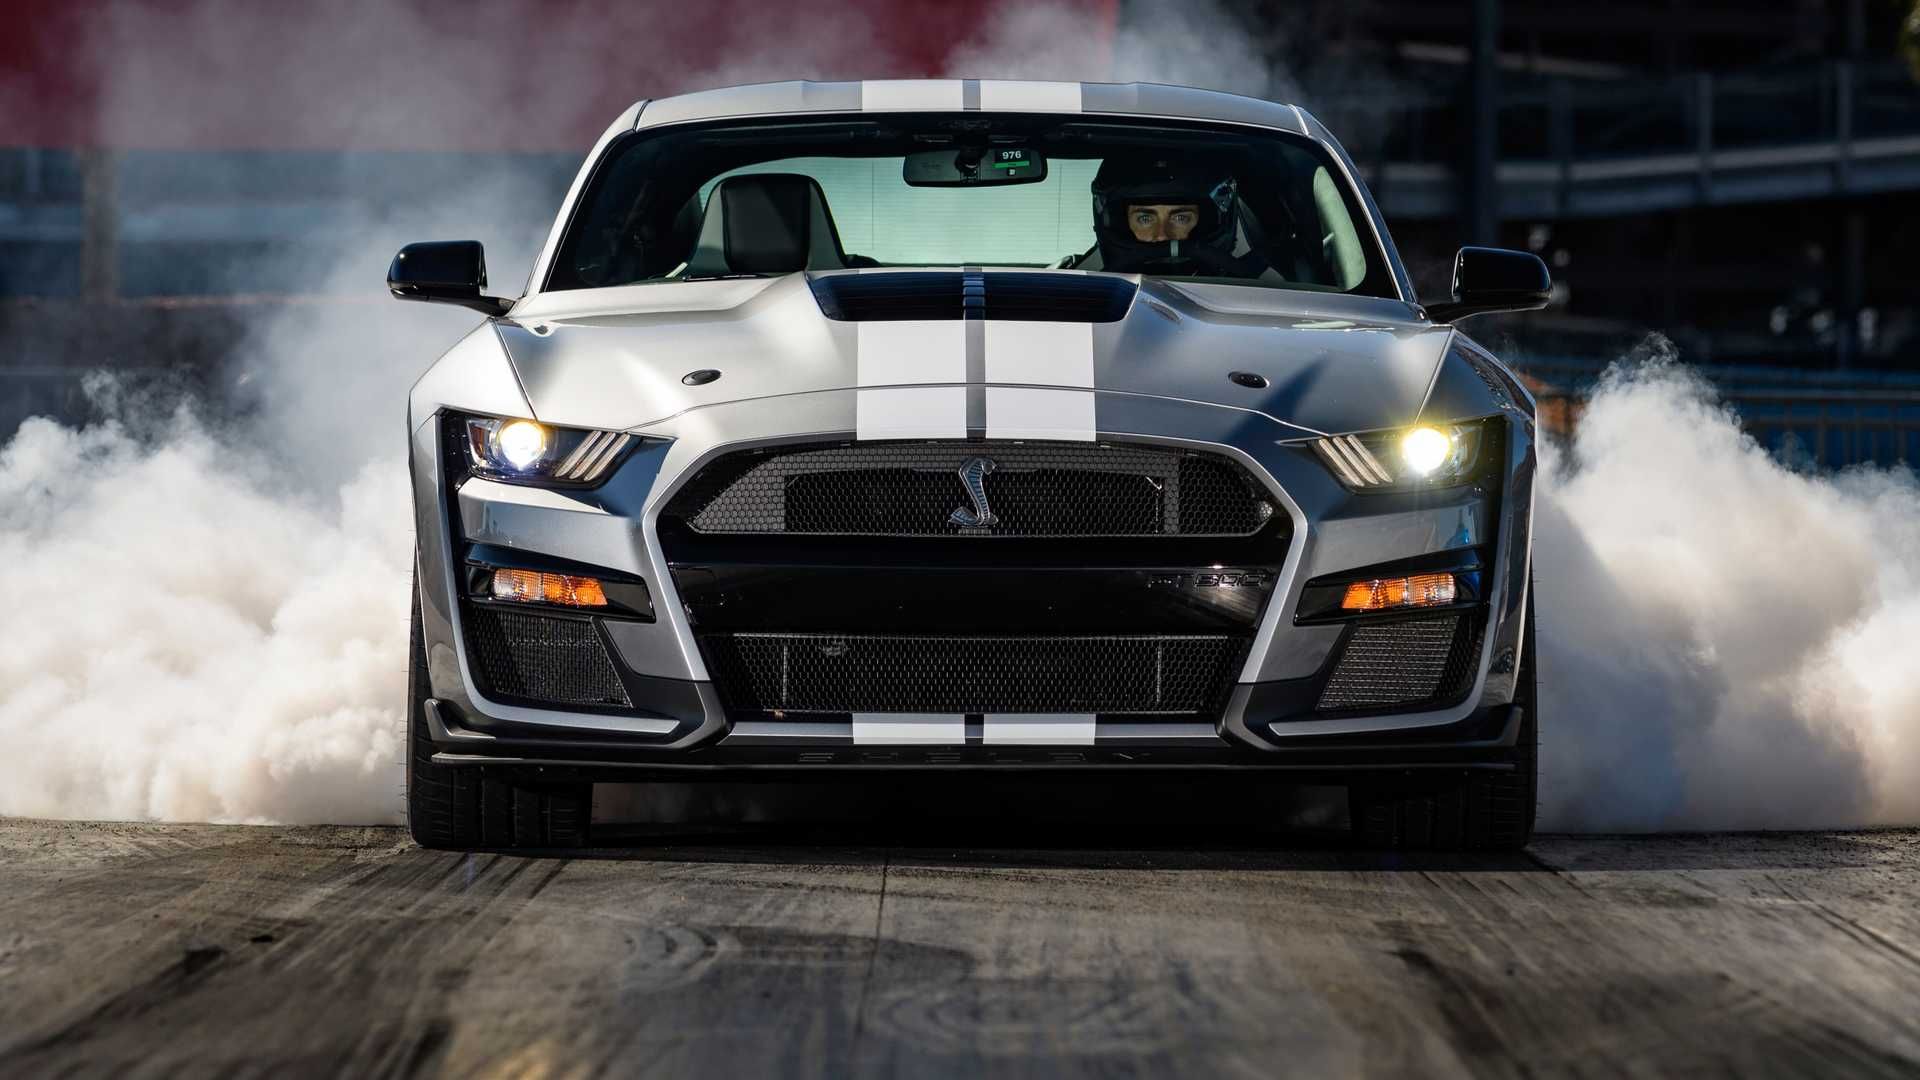 The hero shot of the GT500